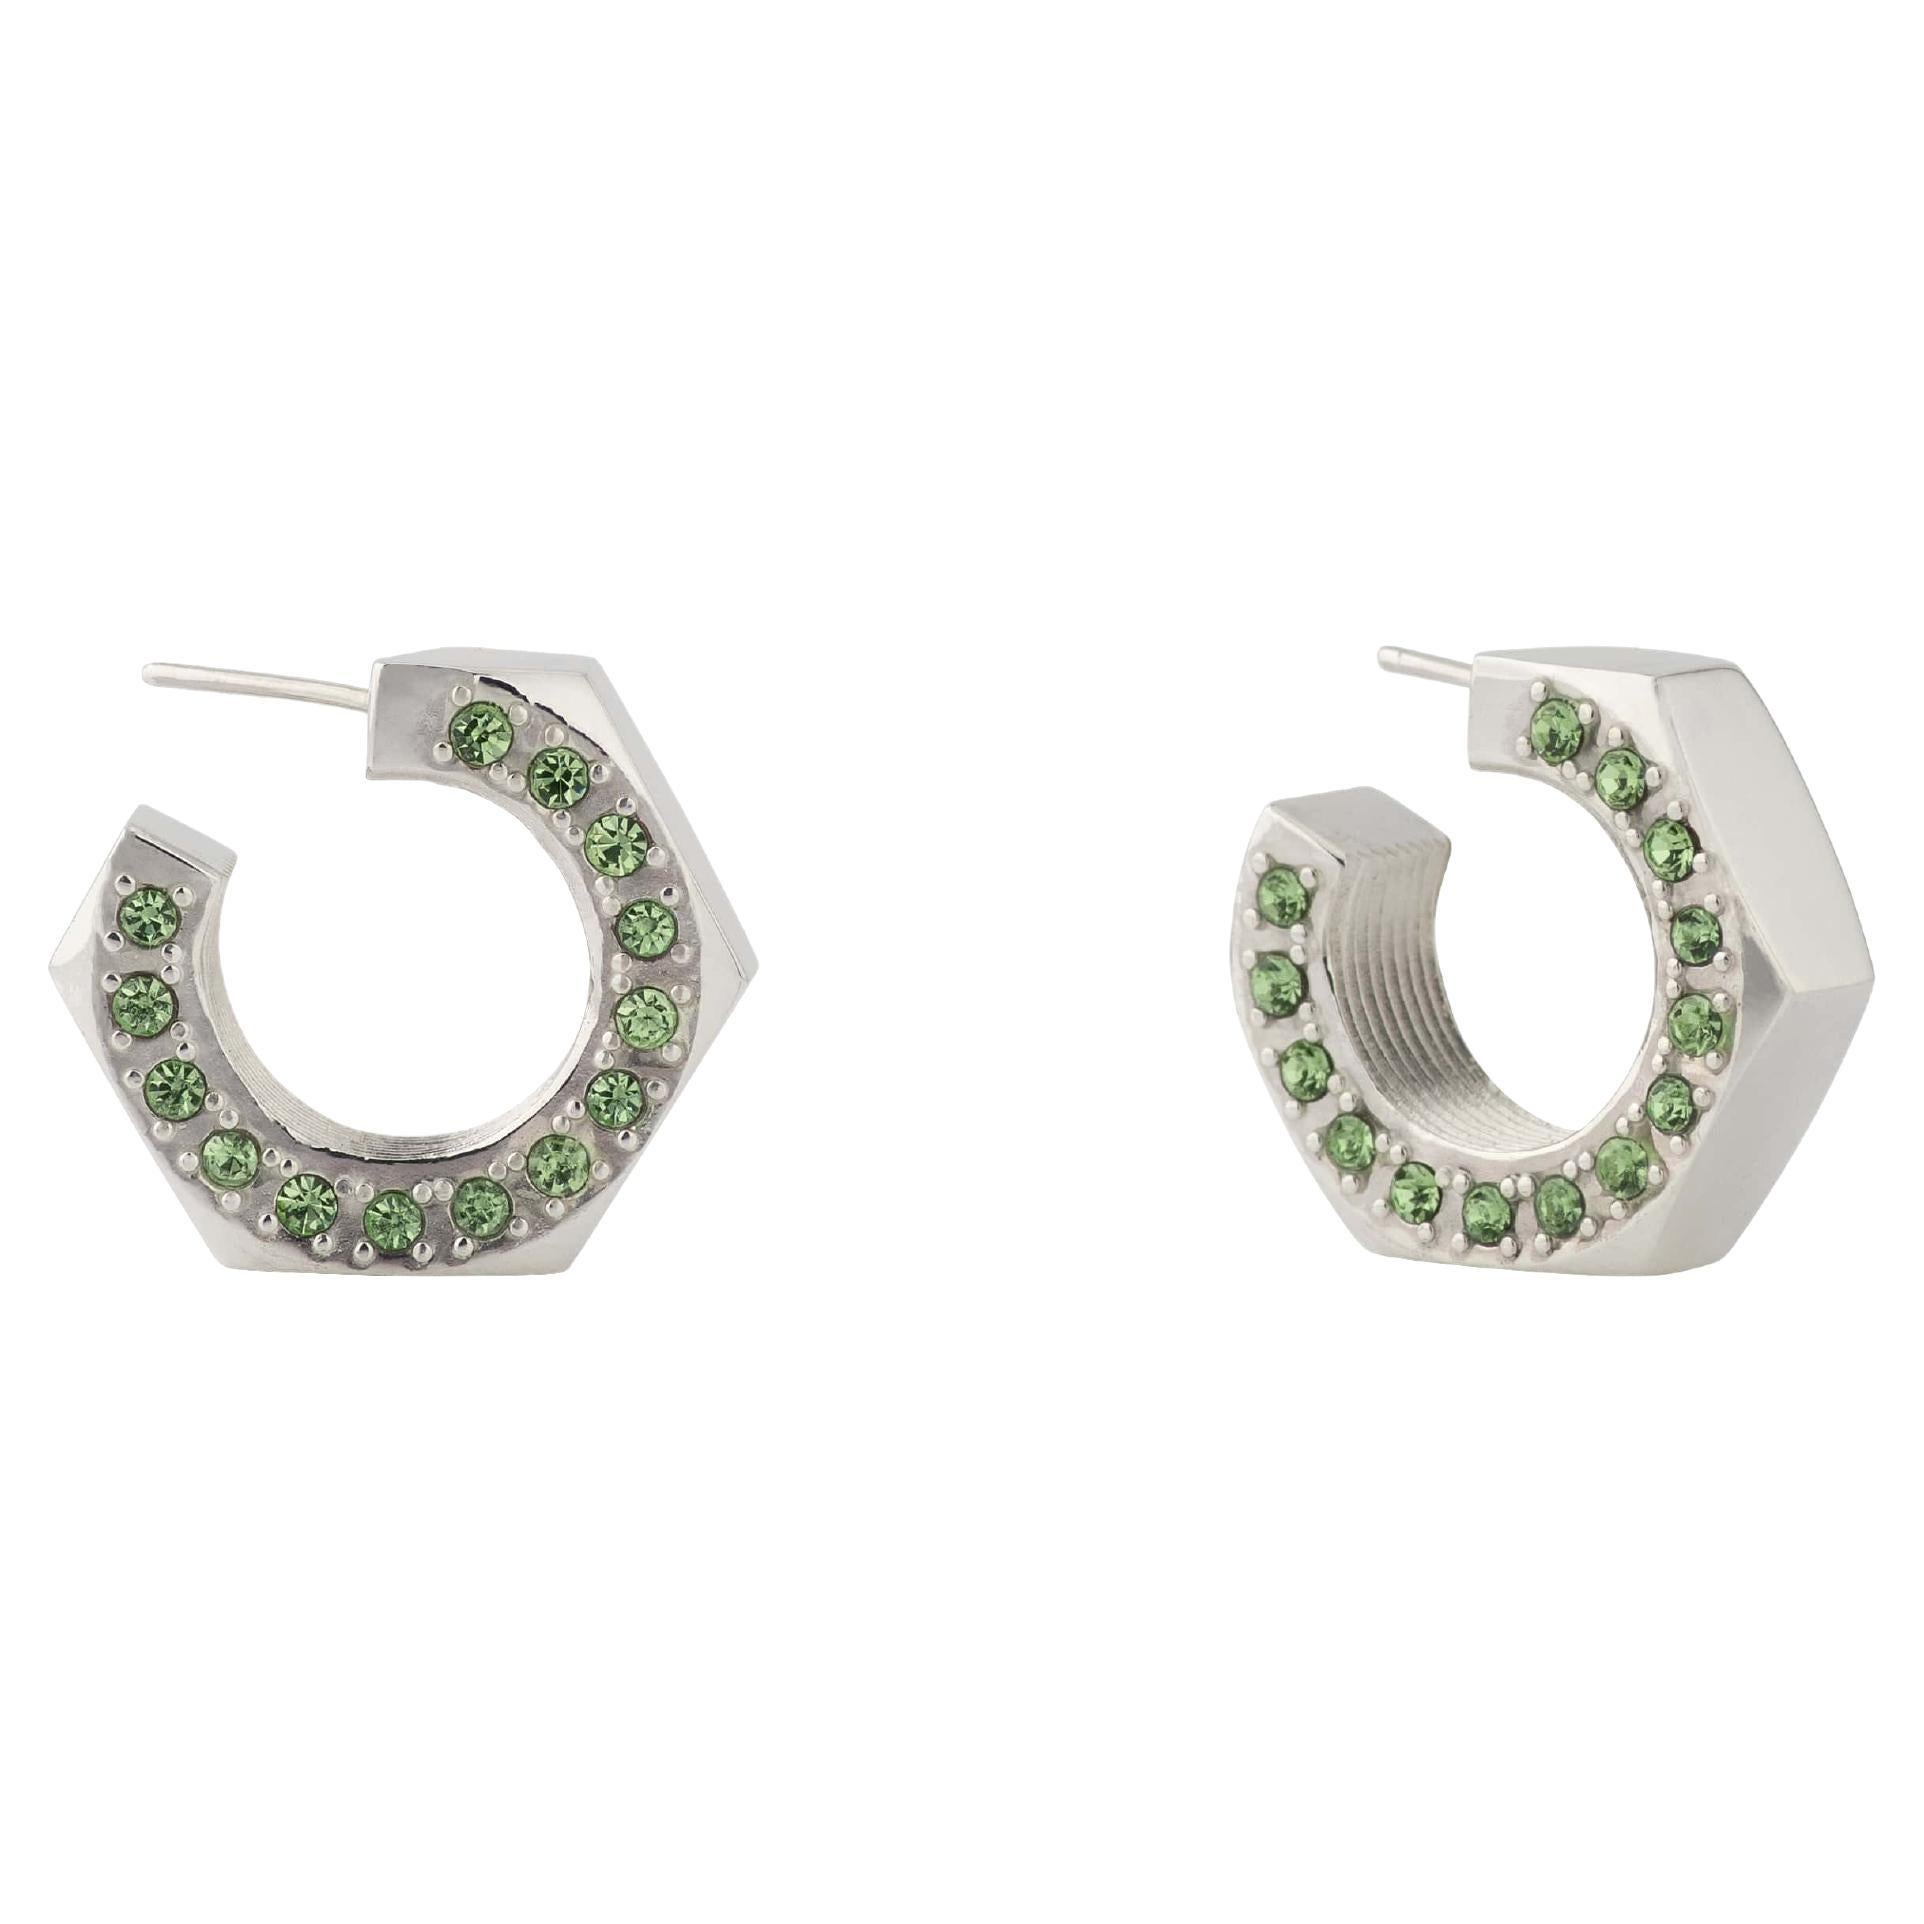 Big Sterling Silver Hoop Earrings with Natural Peridot Stones on the Side For Sale